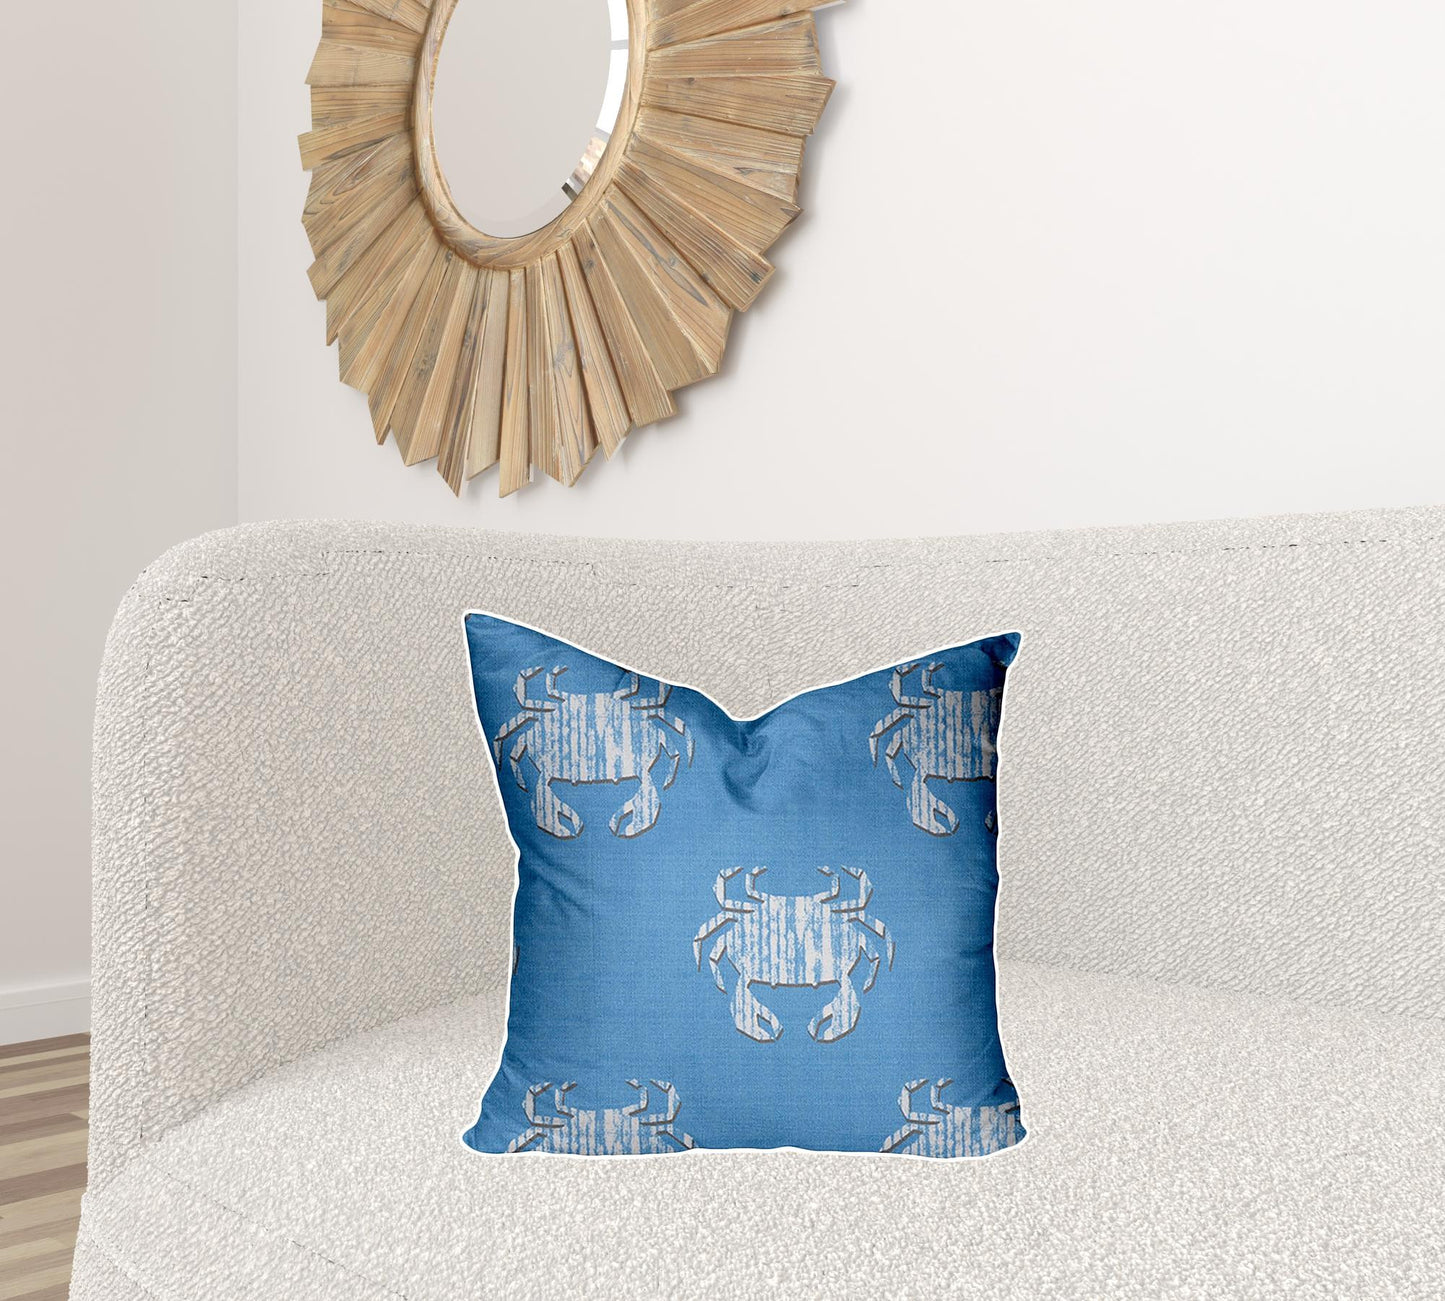 20" X 20" Blue And White Crab Enveloped Coastal Throw Indoor Outdoor Pillow